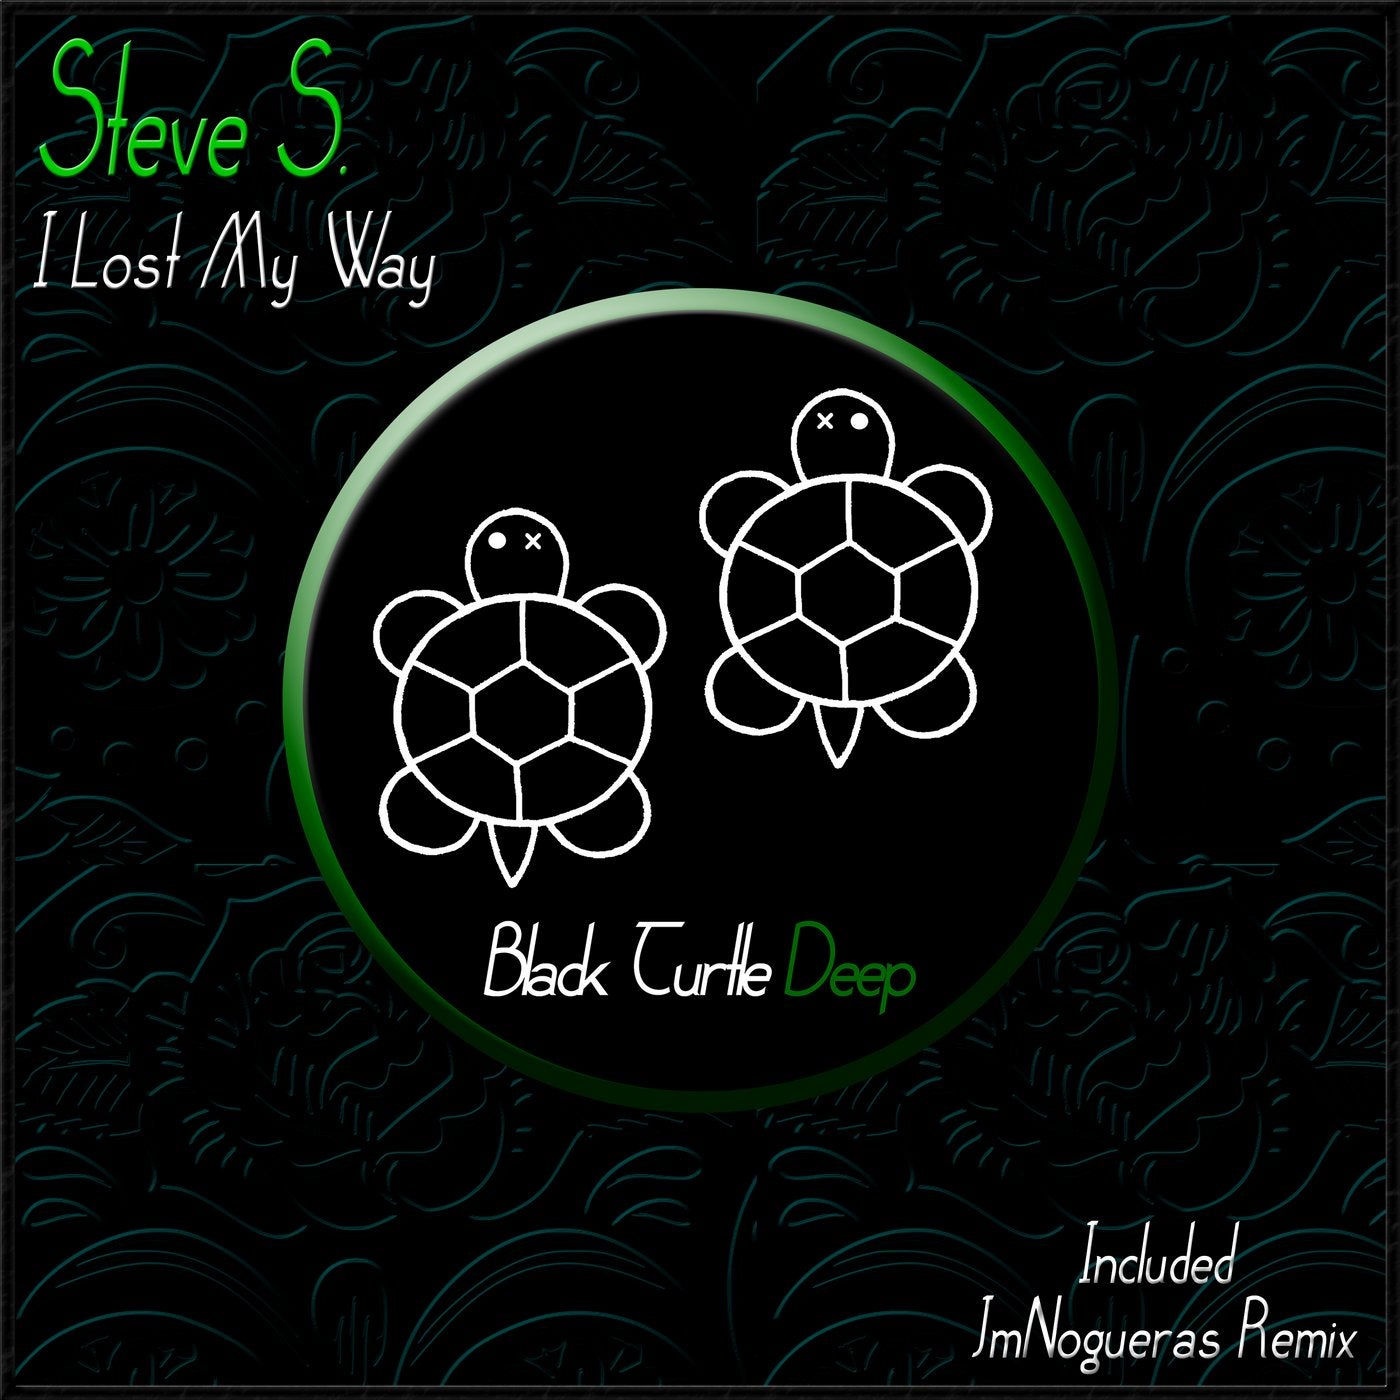 Steve S. - I Lost My Way EP